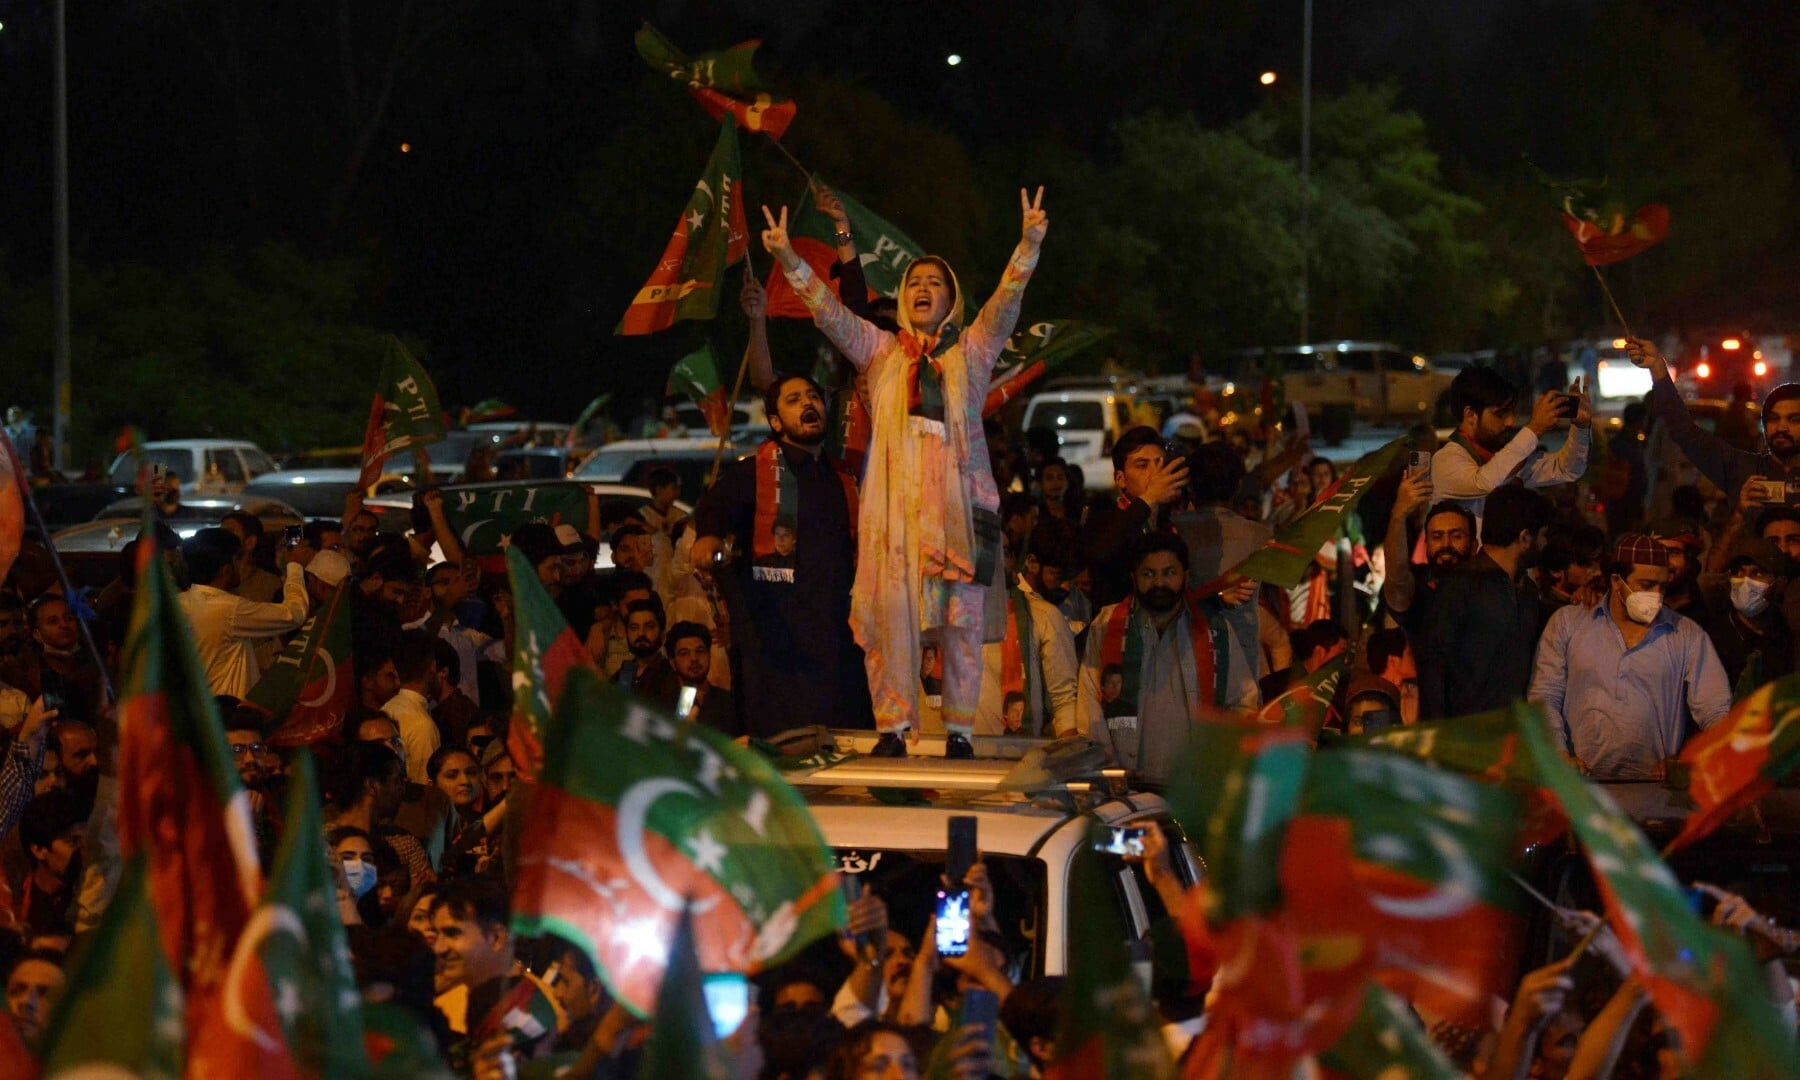 PTI supporters take part in a rally in support of former prime minister Imran Khan in Islamabad on April 10. REUTERS